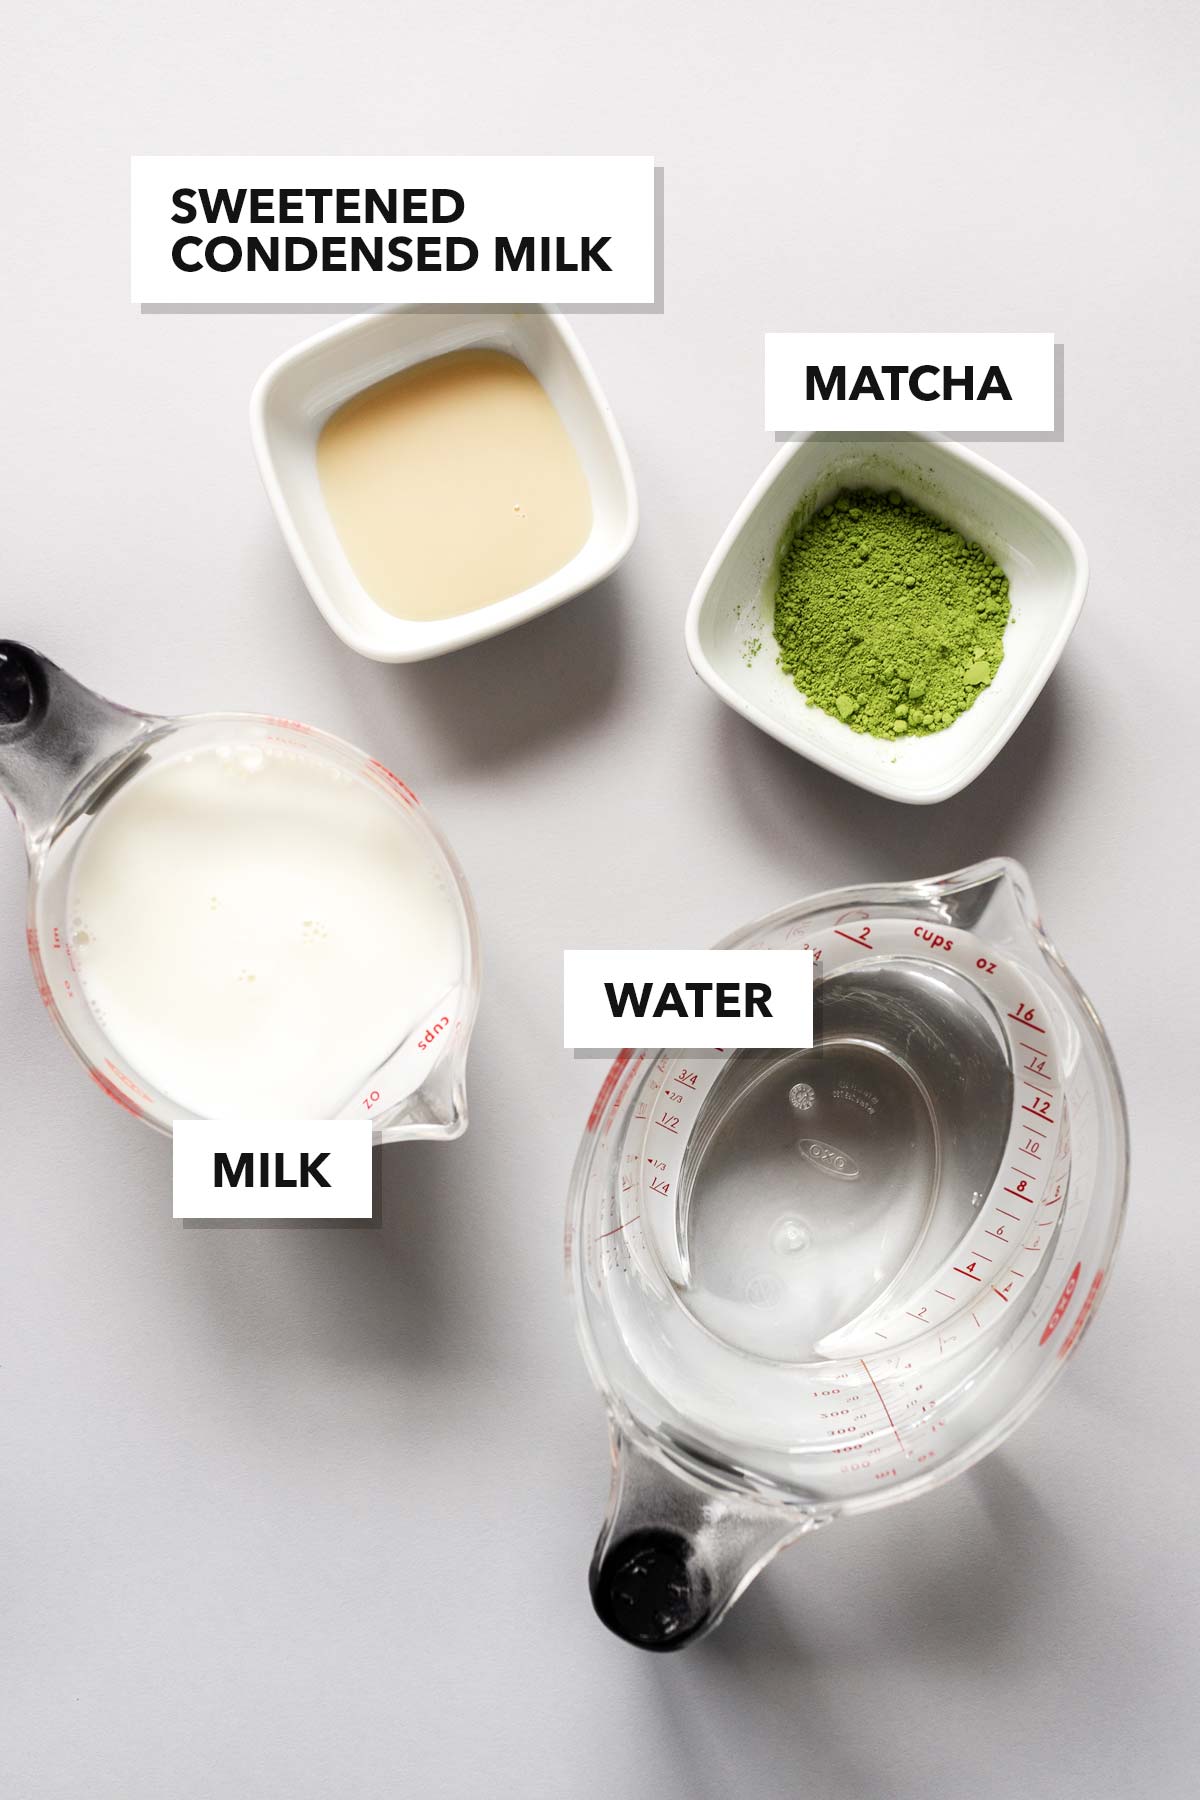 Matcha latte ice cube ingredients on a surface.